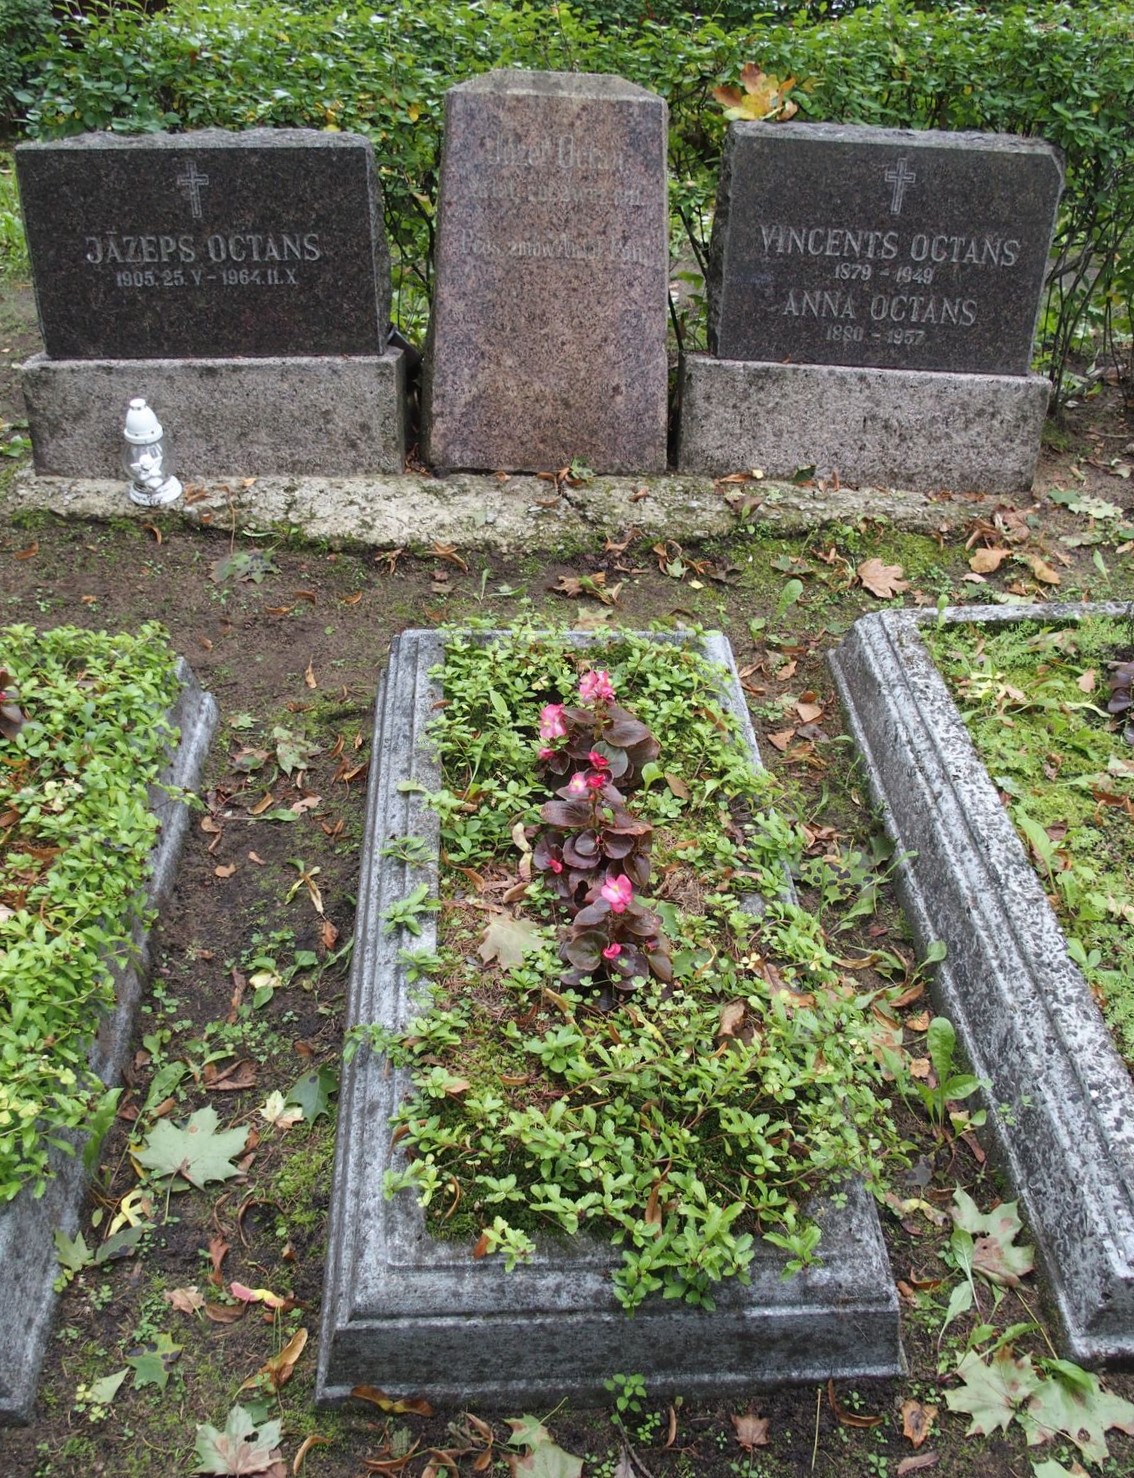 Tombstone of Joseph Octan, St Michael's cemetery in Riga, as of 2021.